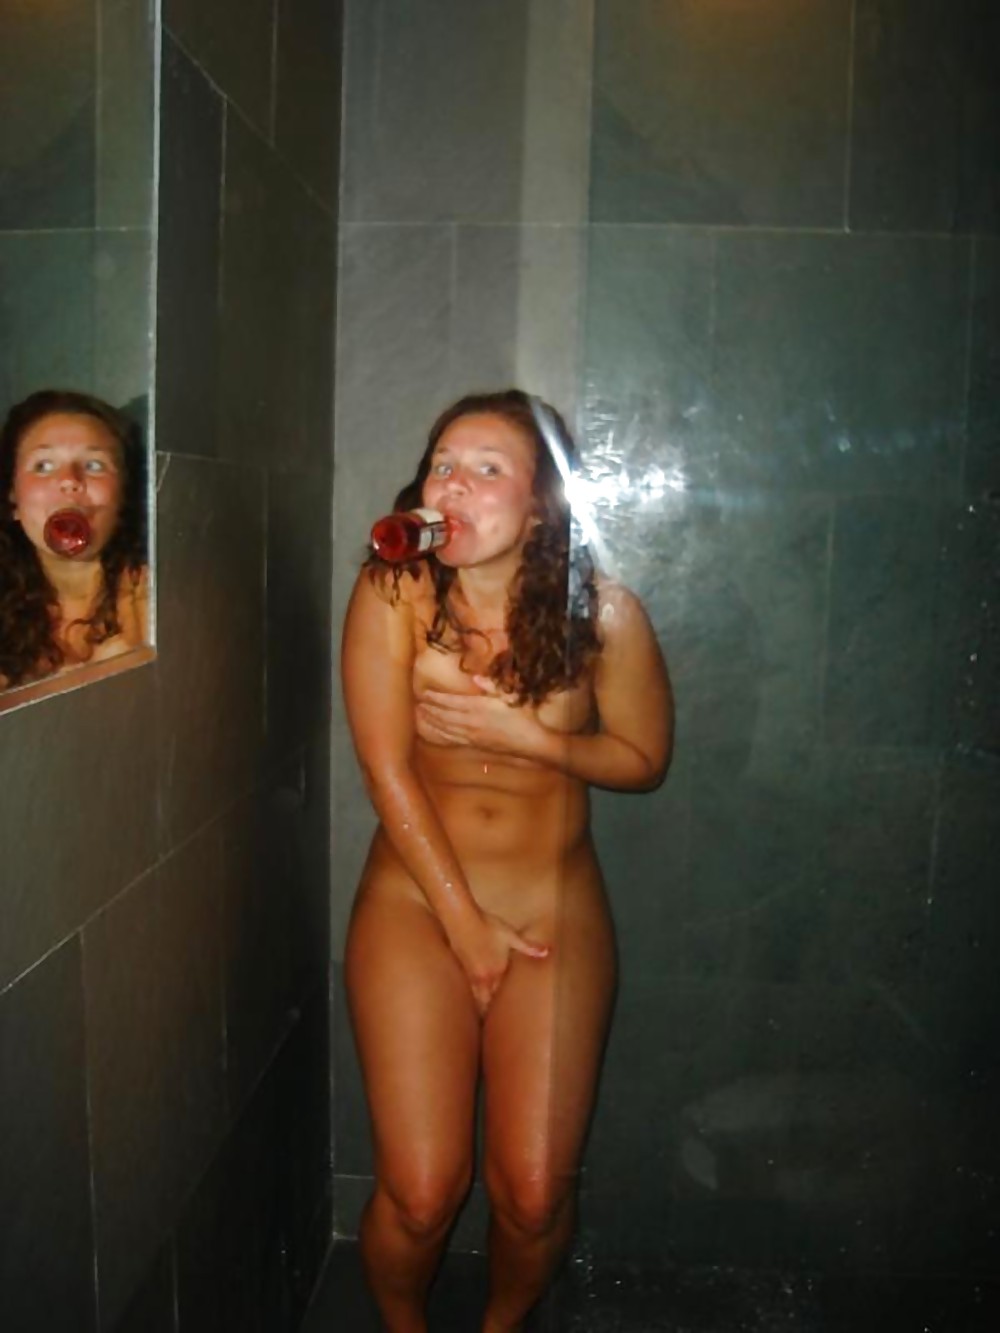 Embarrassed Nude Girls 14 pict gal